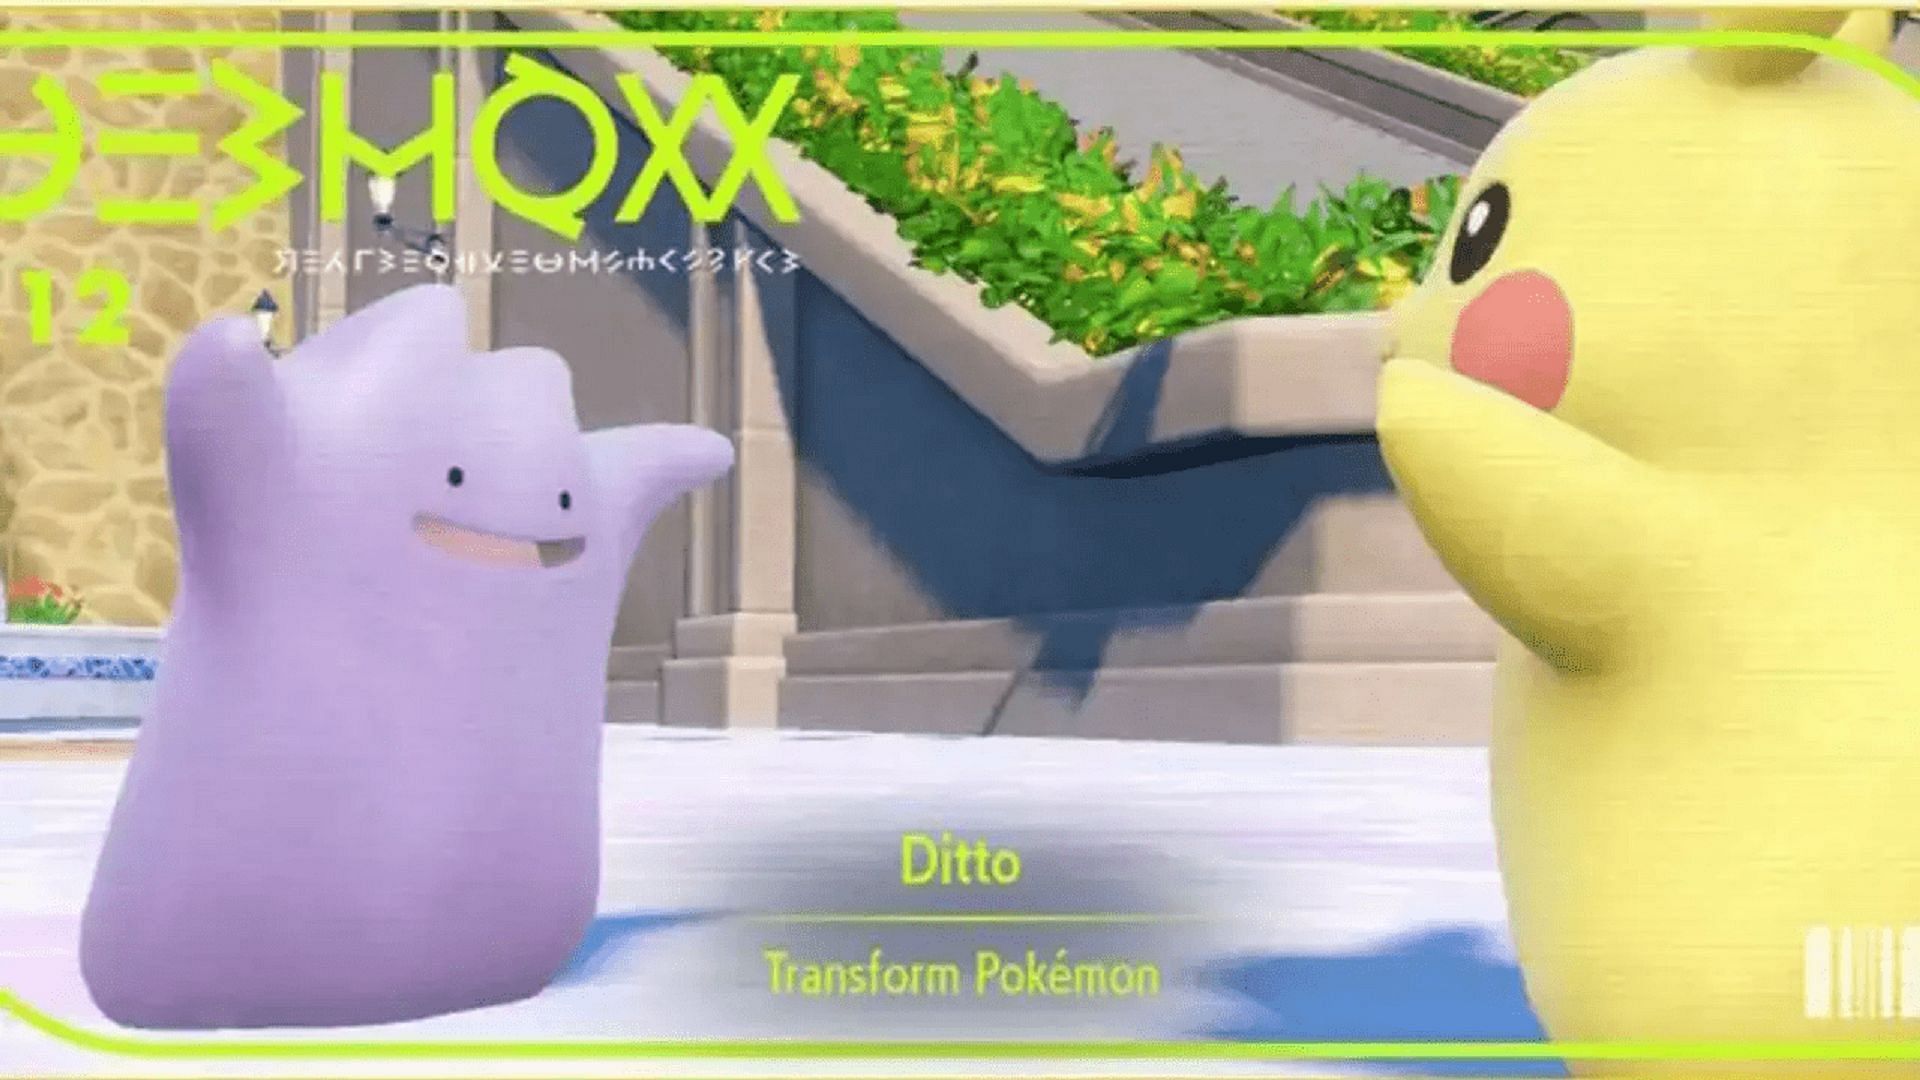 Pokemon Scarlet and Violet, How To Get A 6IV Ditto - Ditto Raid Farm